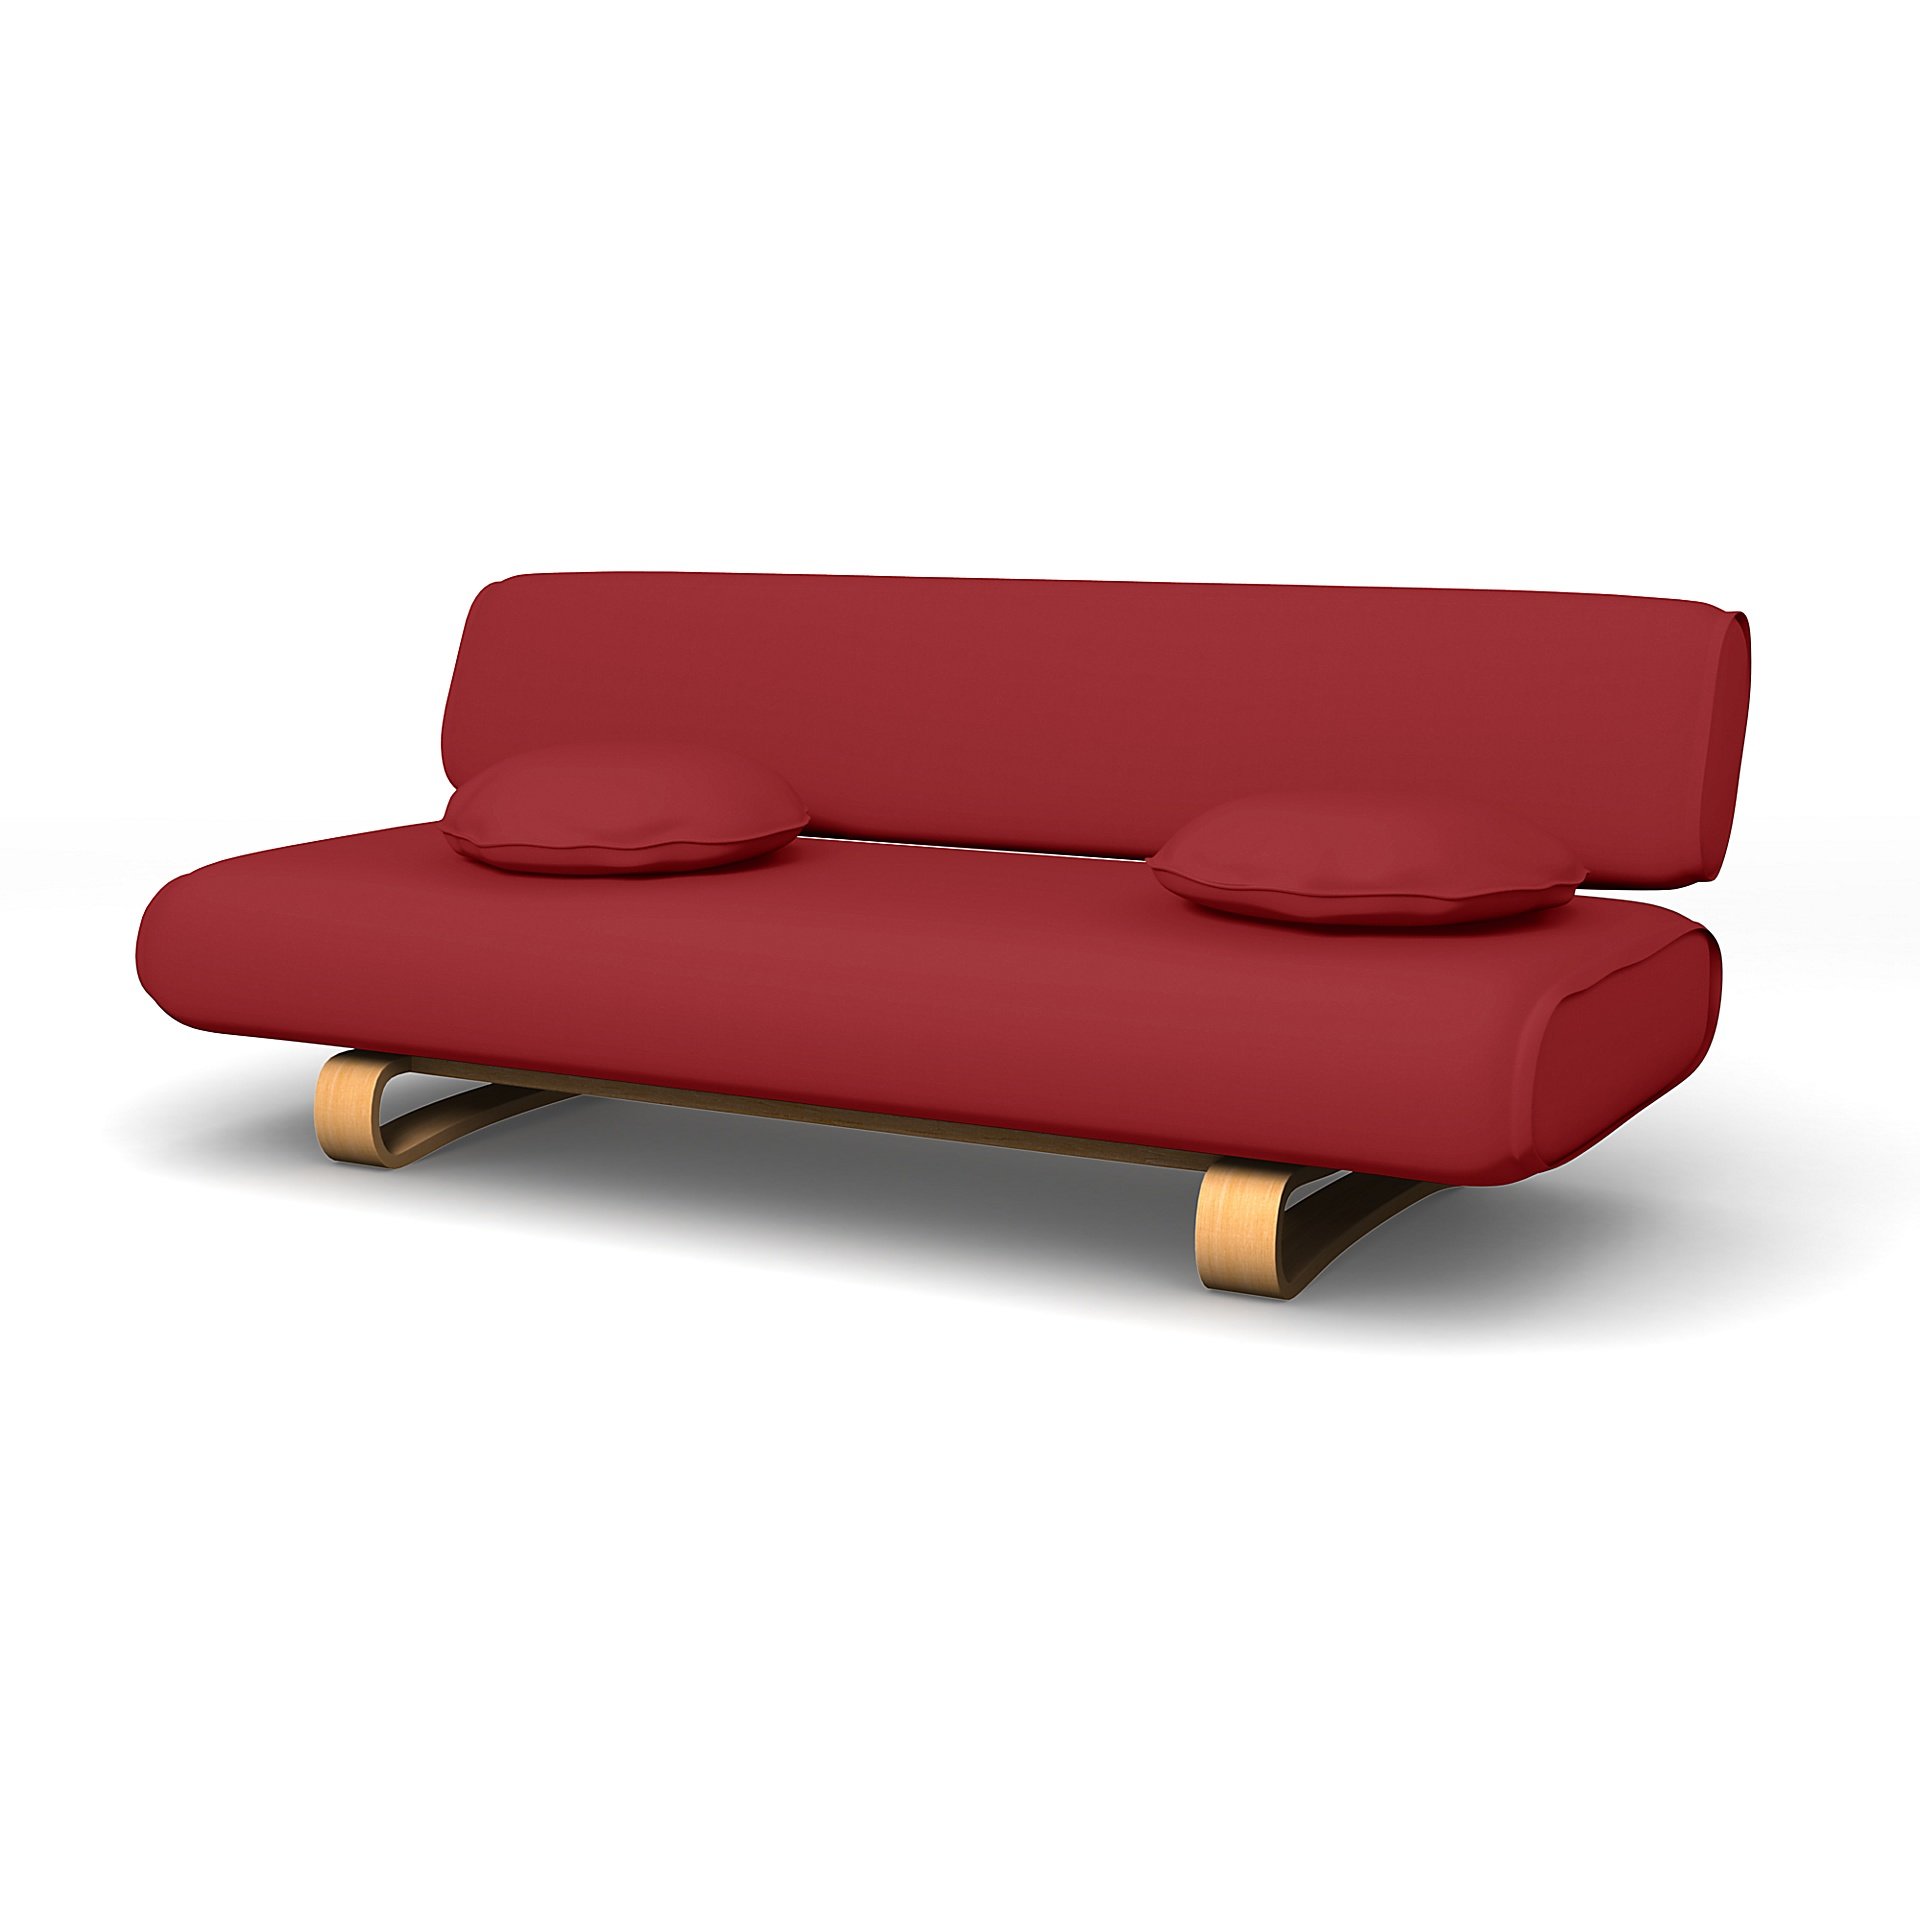 IKEA - Allerum Sofa Bed Cover, Scarlet Red, Cotton - Bemz